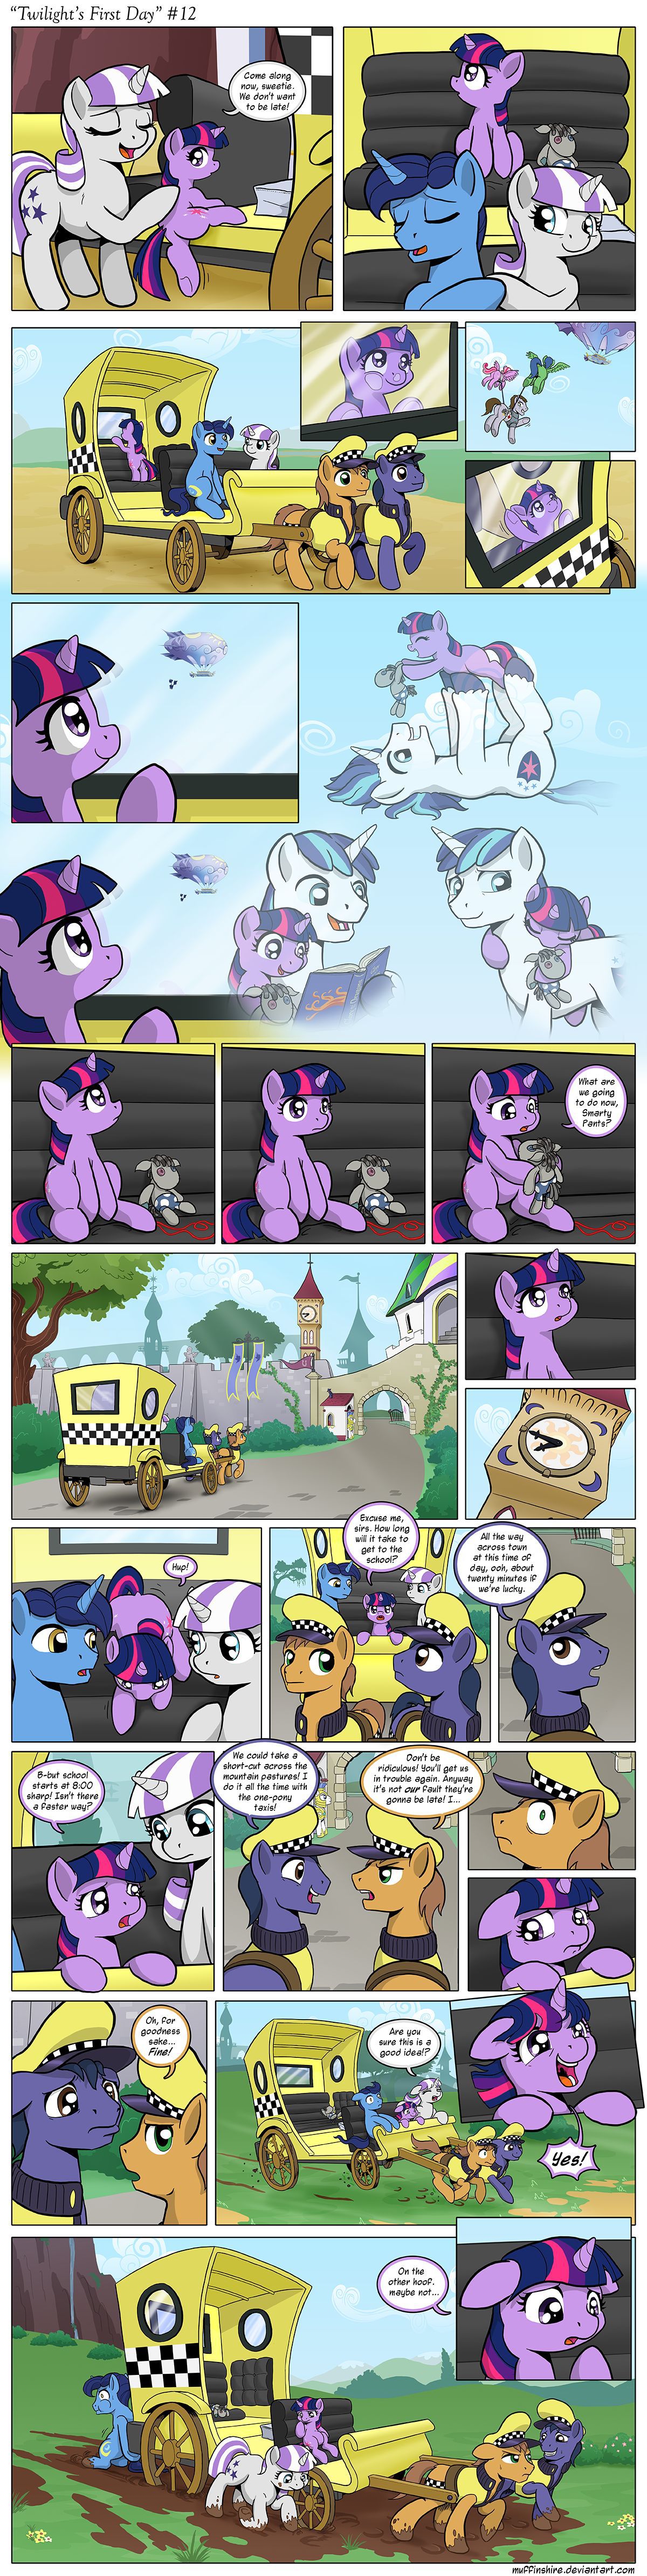 [Muffinshire] Twilight's First Day (My Little Pony: Friendship is Magic) [English] 12